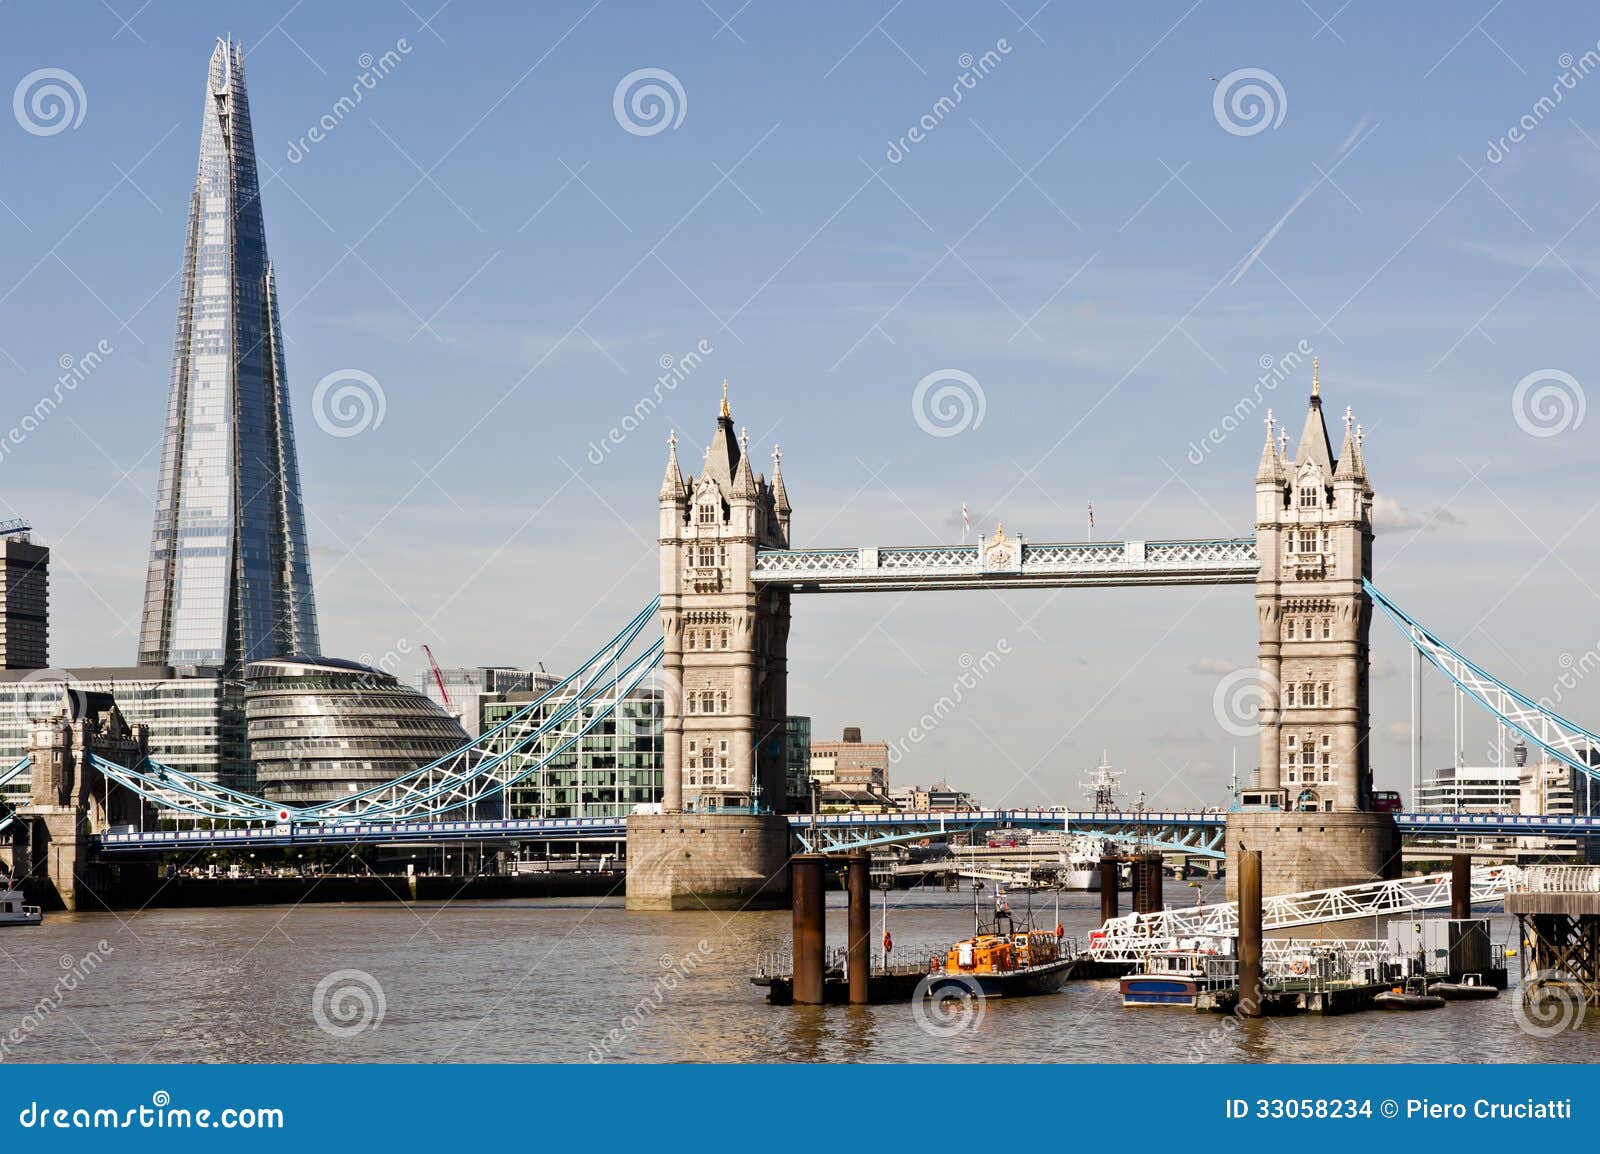 new london skyline with tower bridge and the new the shard. shot in 2013